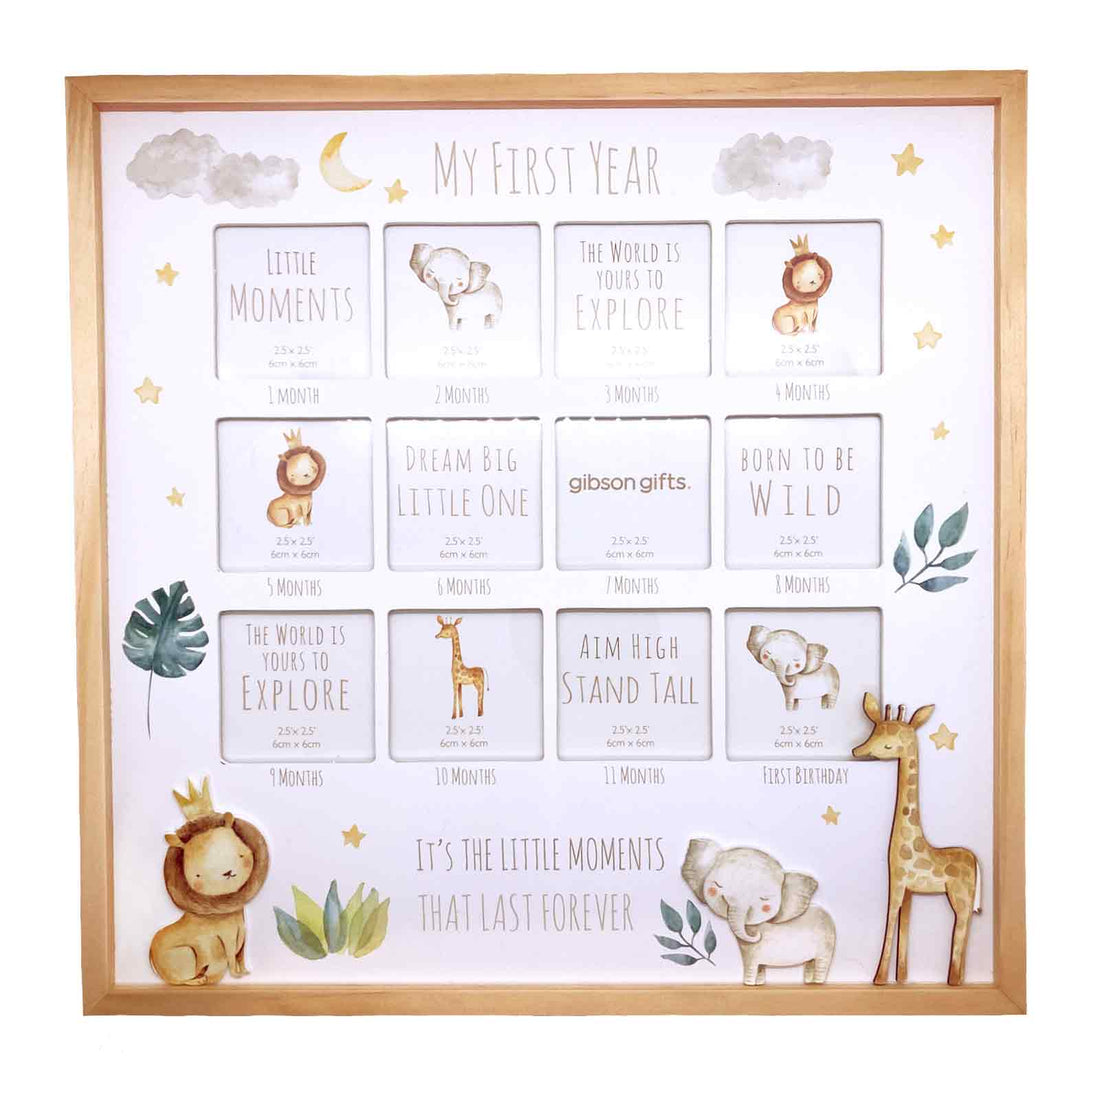 My First Year Little Moments Wooden Photo Frame